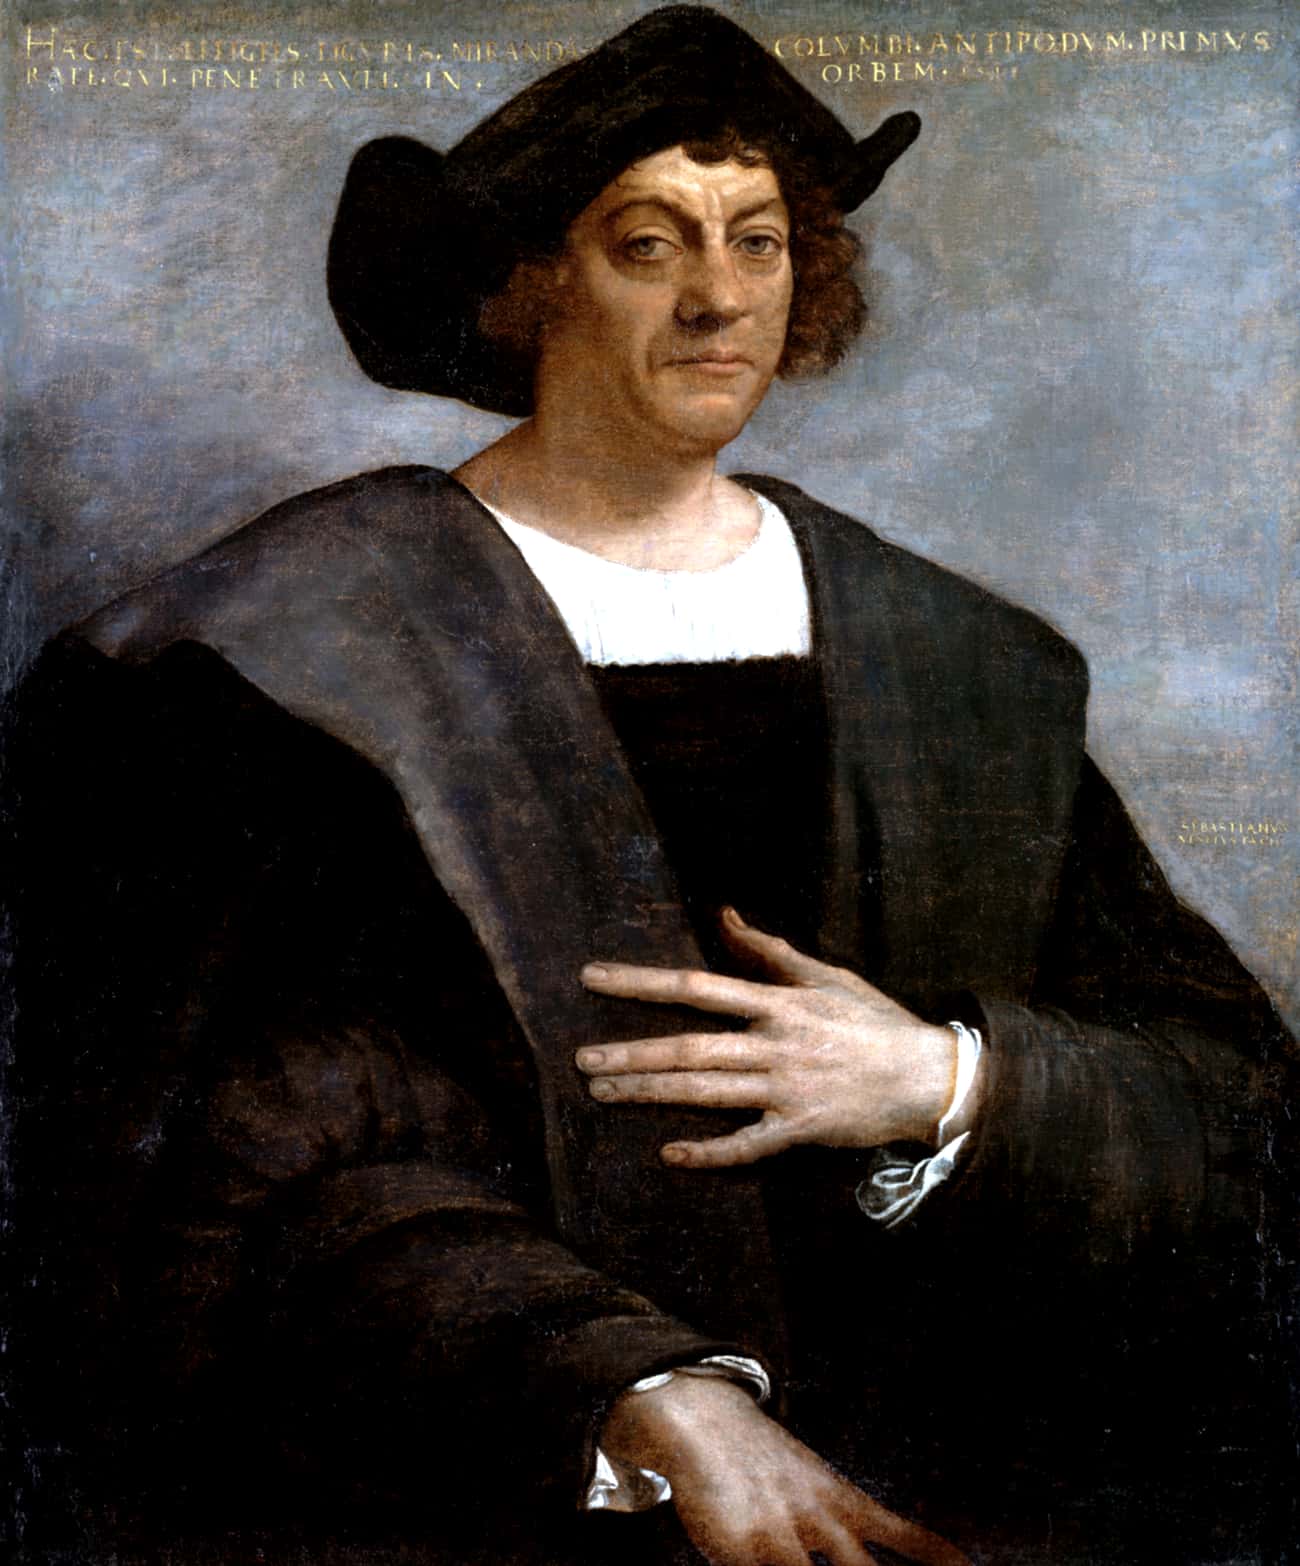 Christopher Columbus Probably Imported Syphilis From The New World